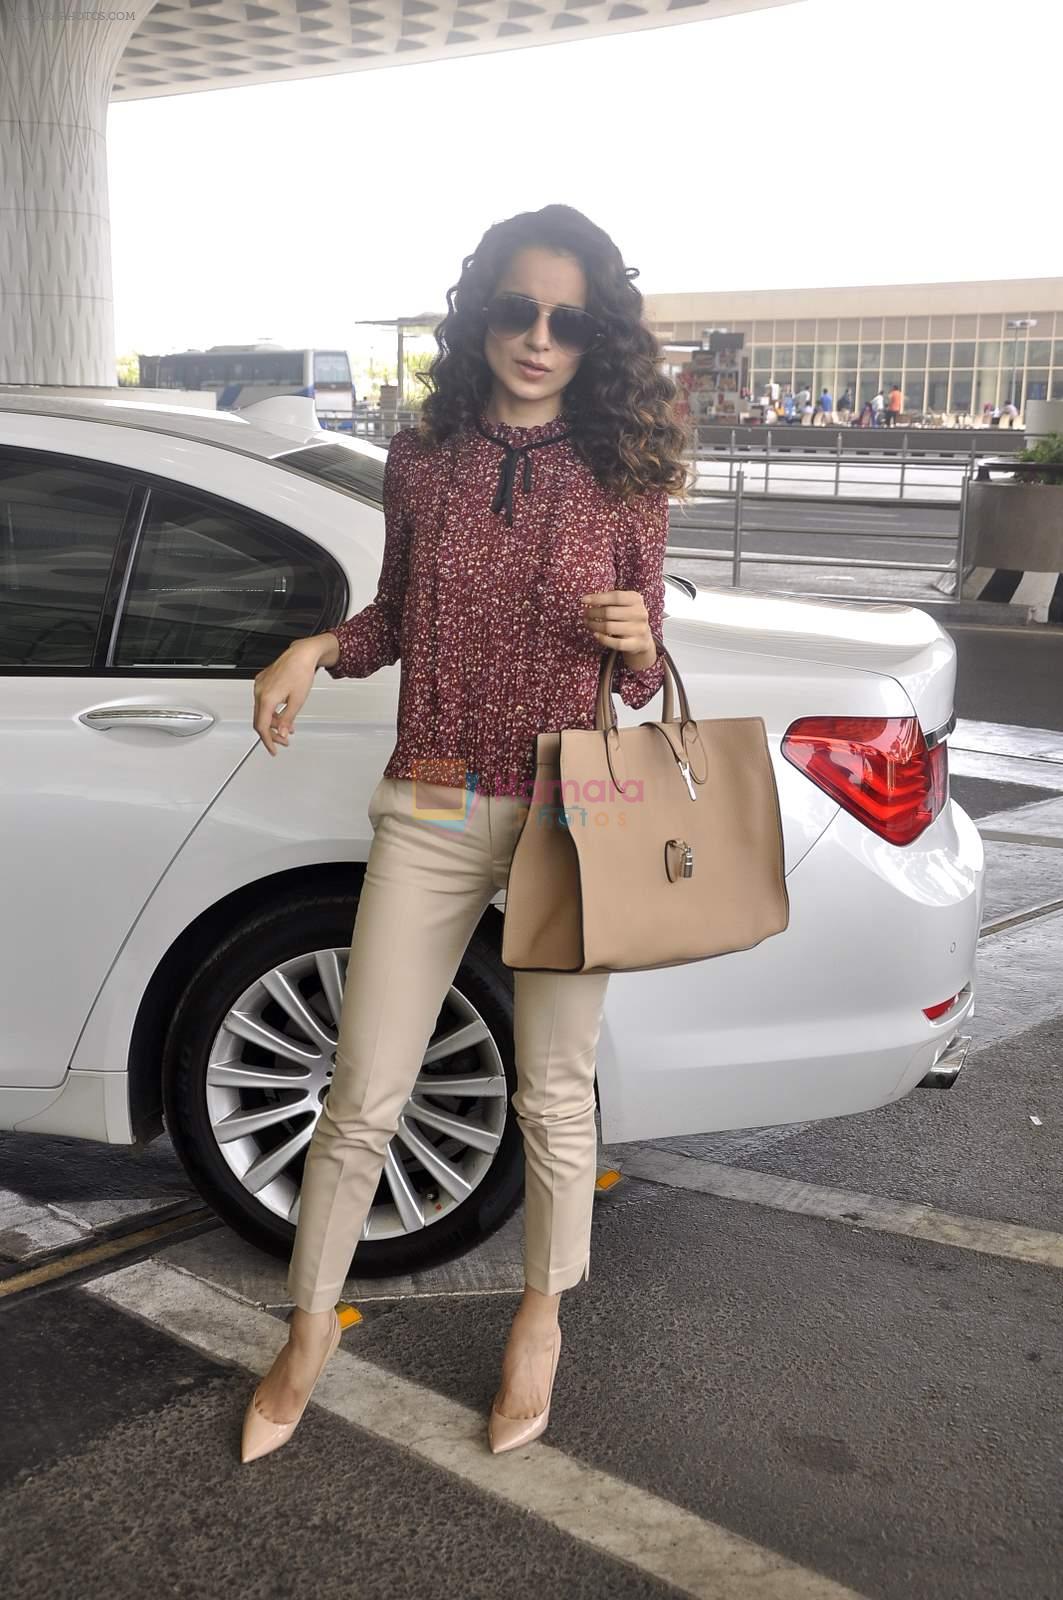 Kangana Ranaut snapped as she leaves for Delhi for the National Award ceremony on 2nd May 2015